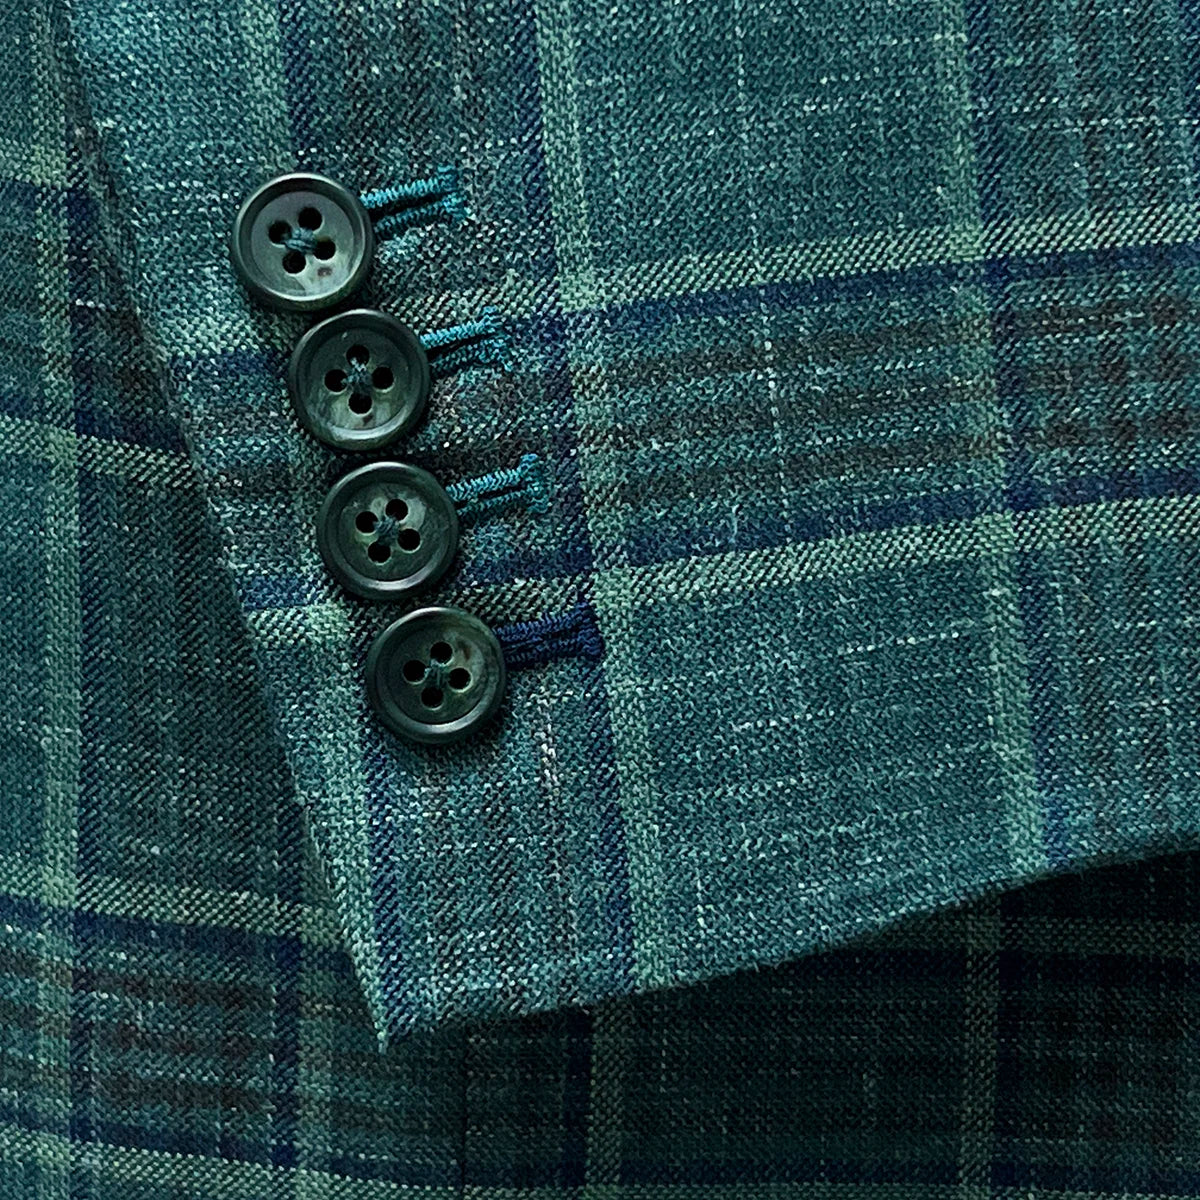 Functional sleeve buttonholes on the Westwood Hart hunter green with navy and chocolate brown plaid mens sport coat, with navy blue contrast accents on the last buttonhole.